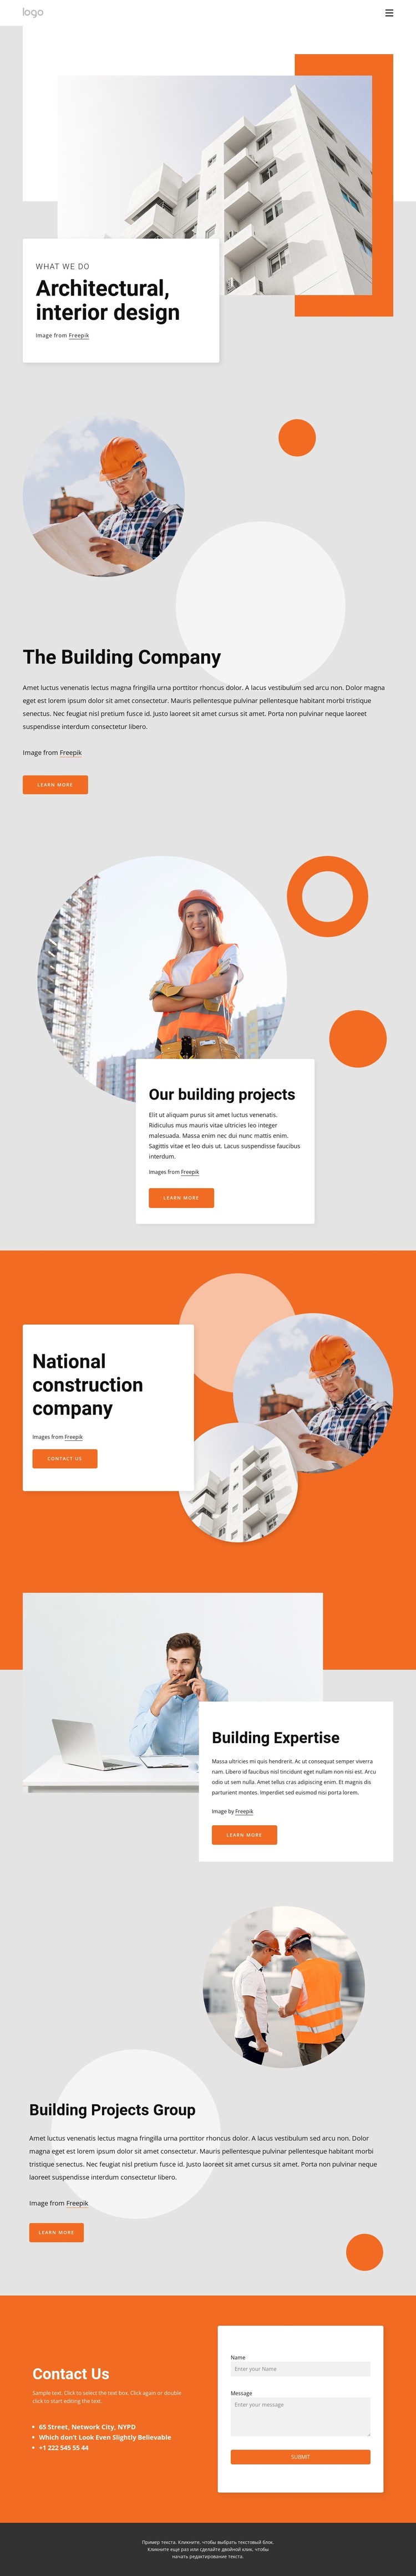 Architects in London Web Design